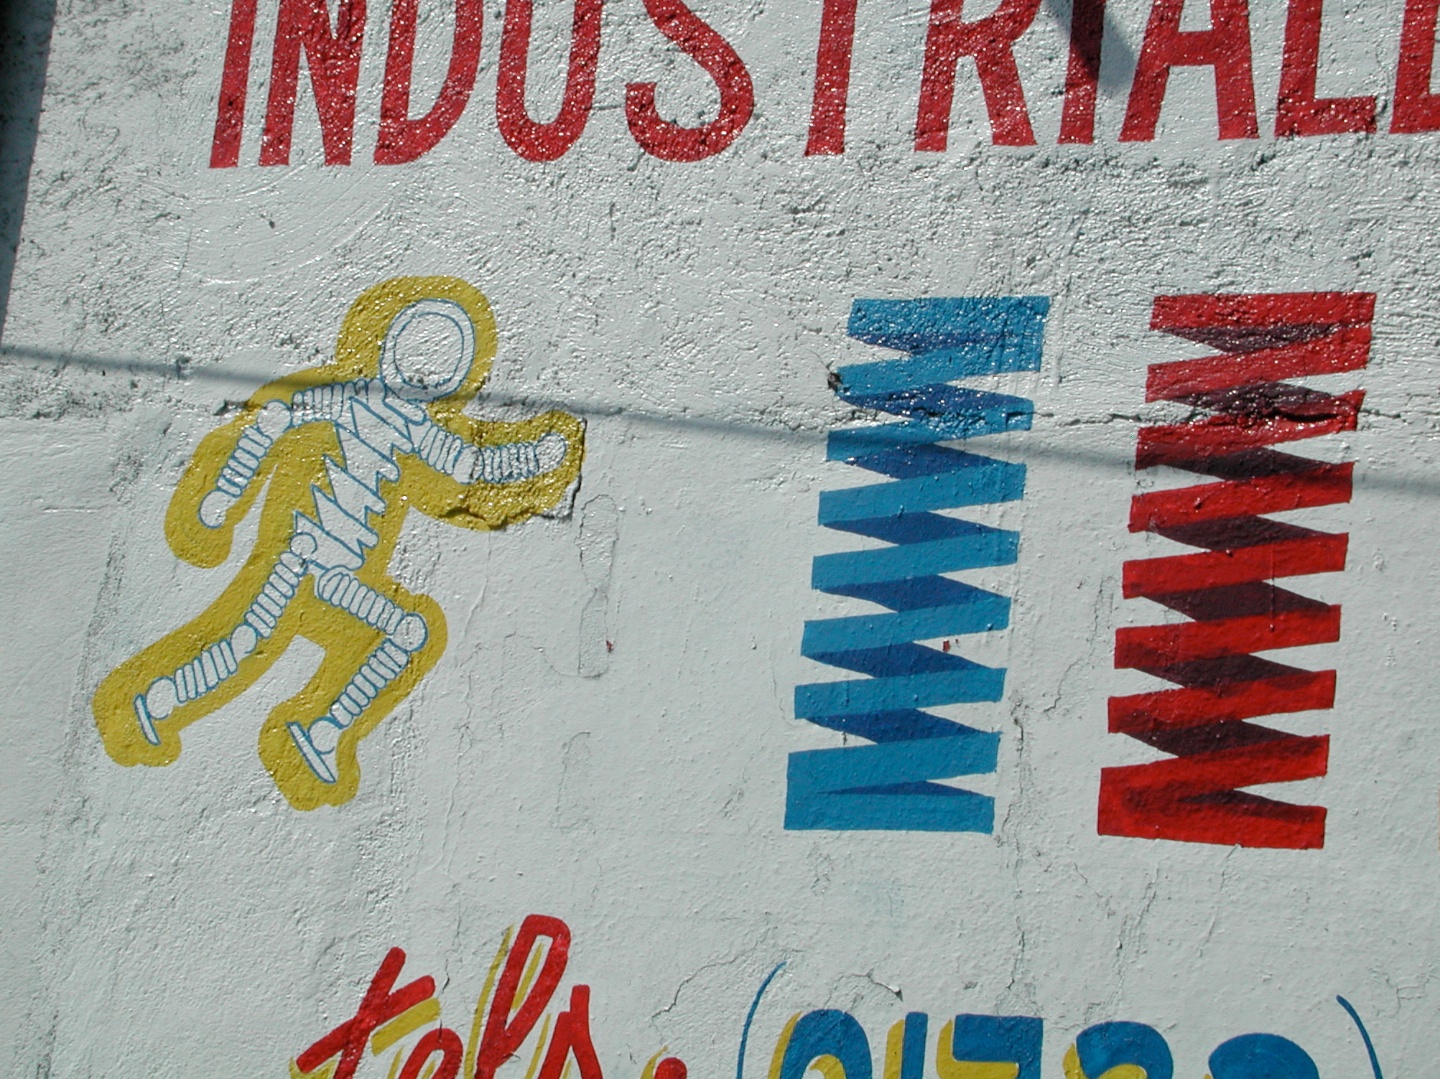 Yellow Movement (towards Blue & Red), Mexico City, Mexico 2006